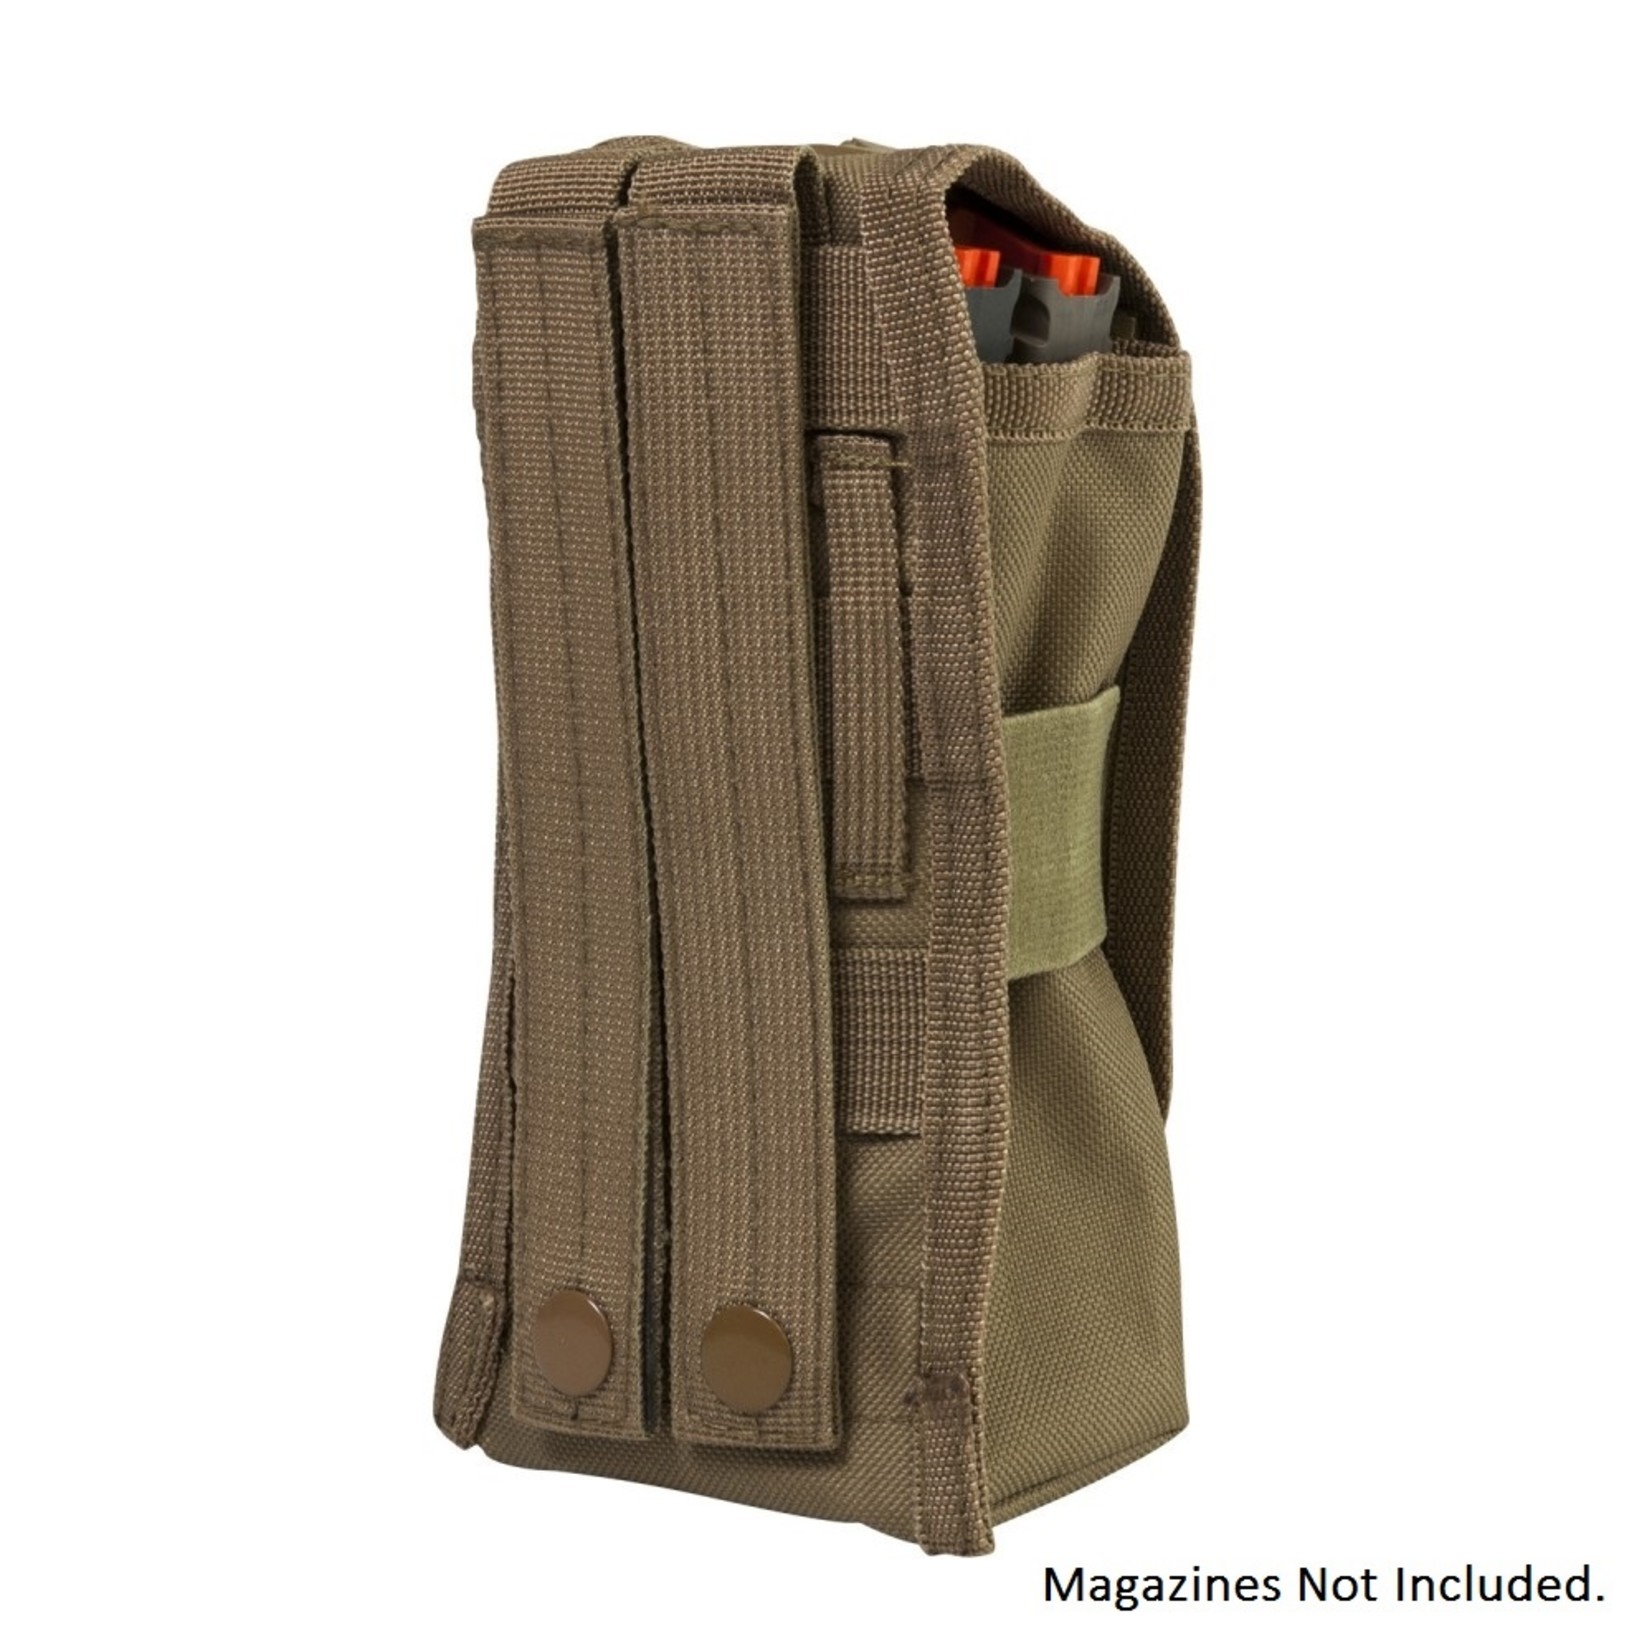 NcStar/Vism Vism 2 AR/AK Mags or Radio Pouch -